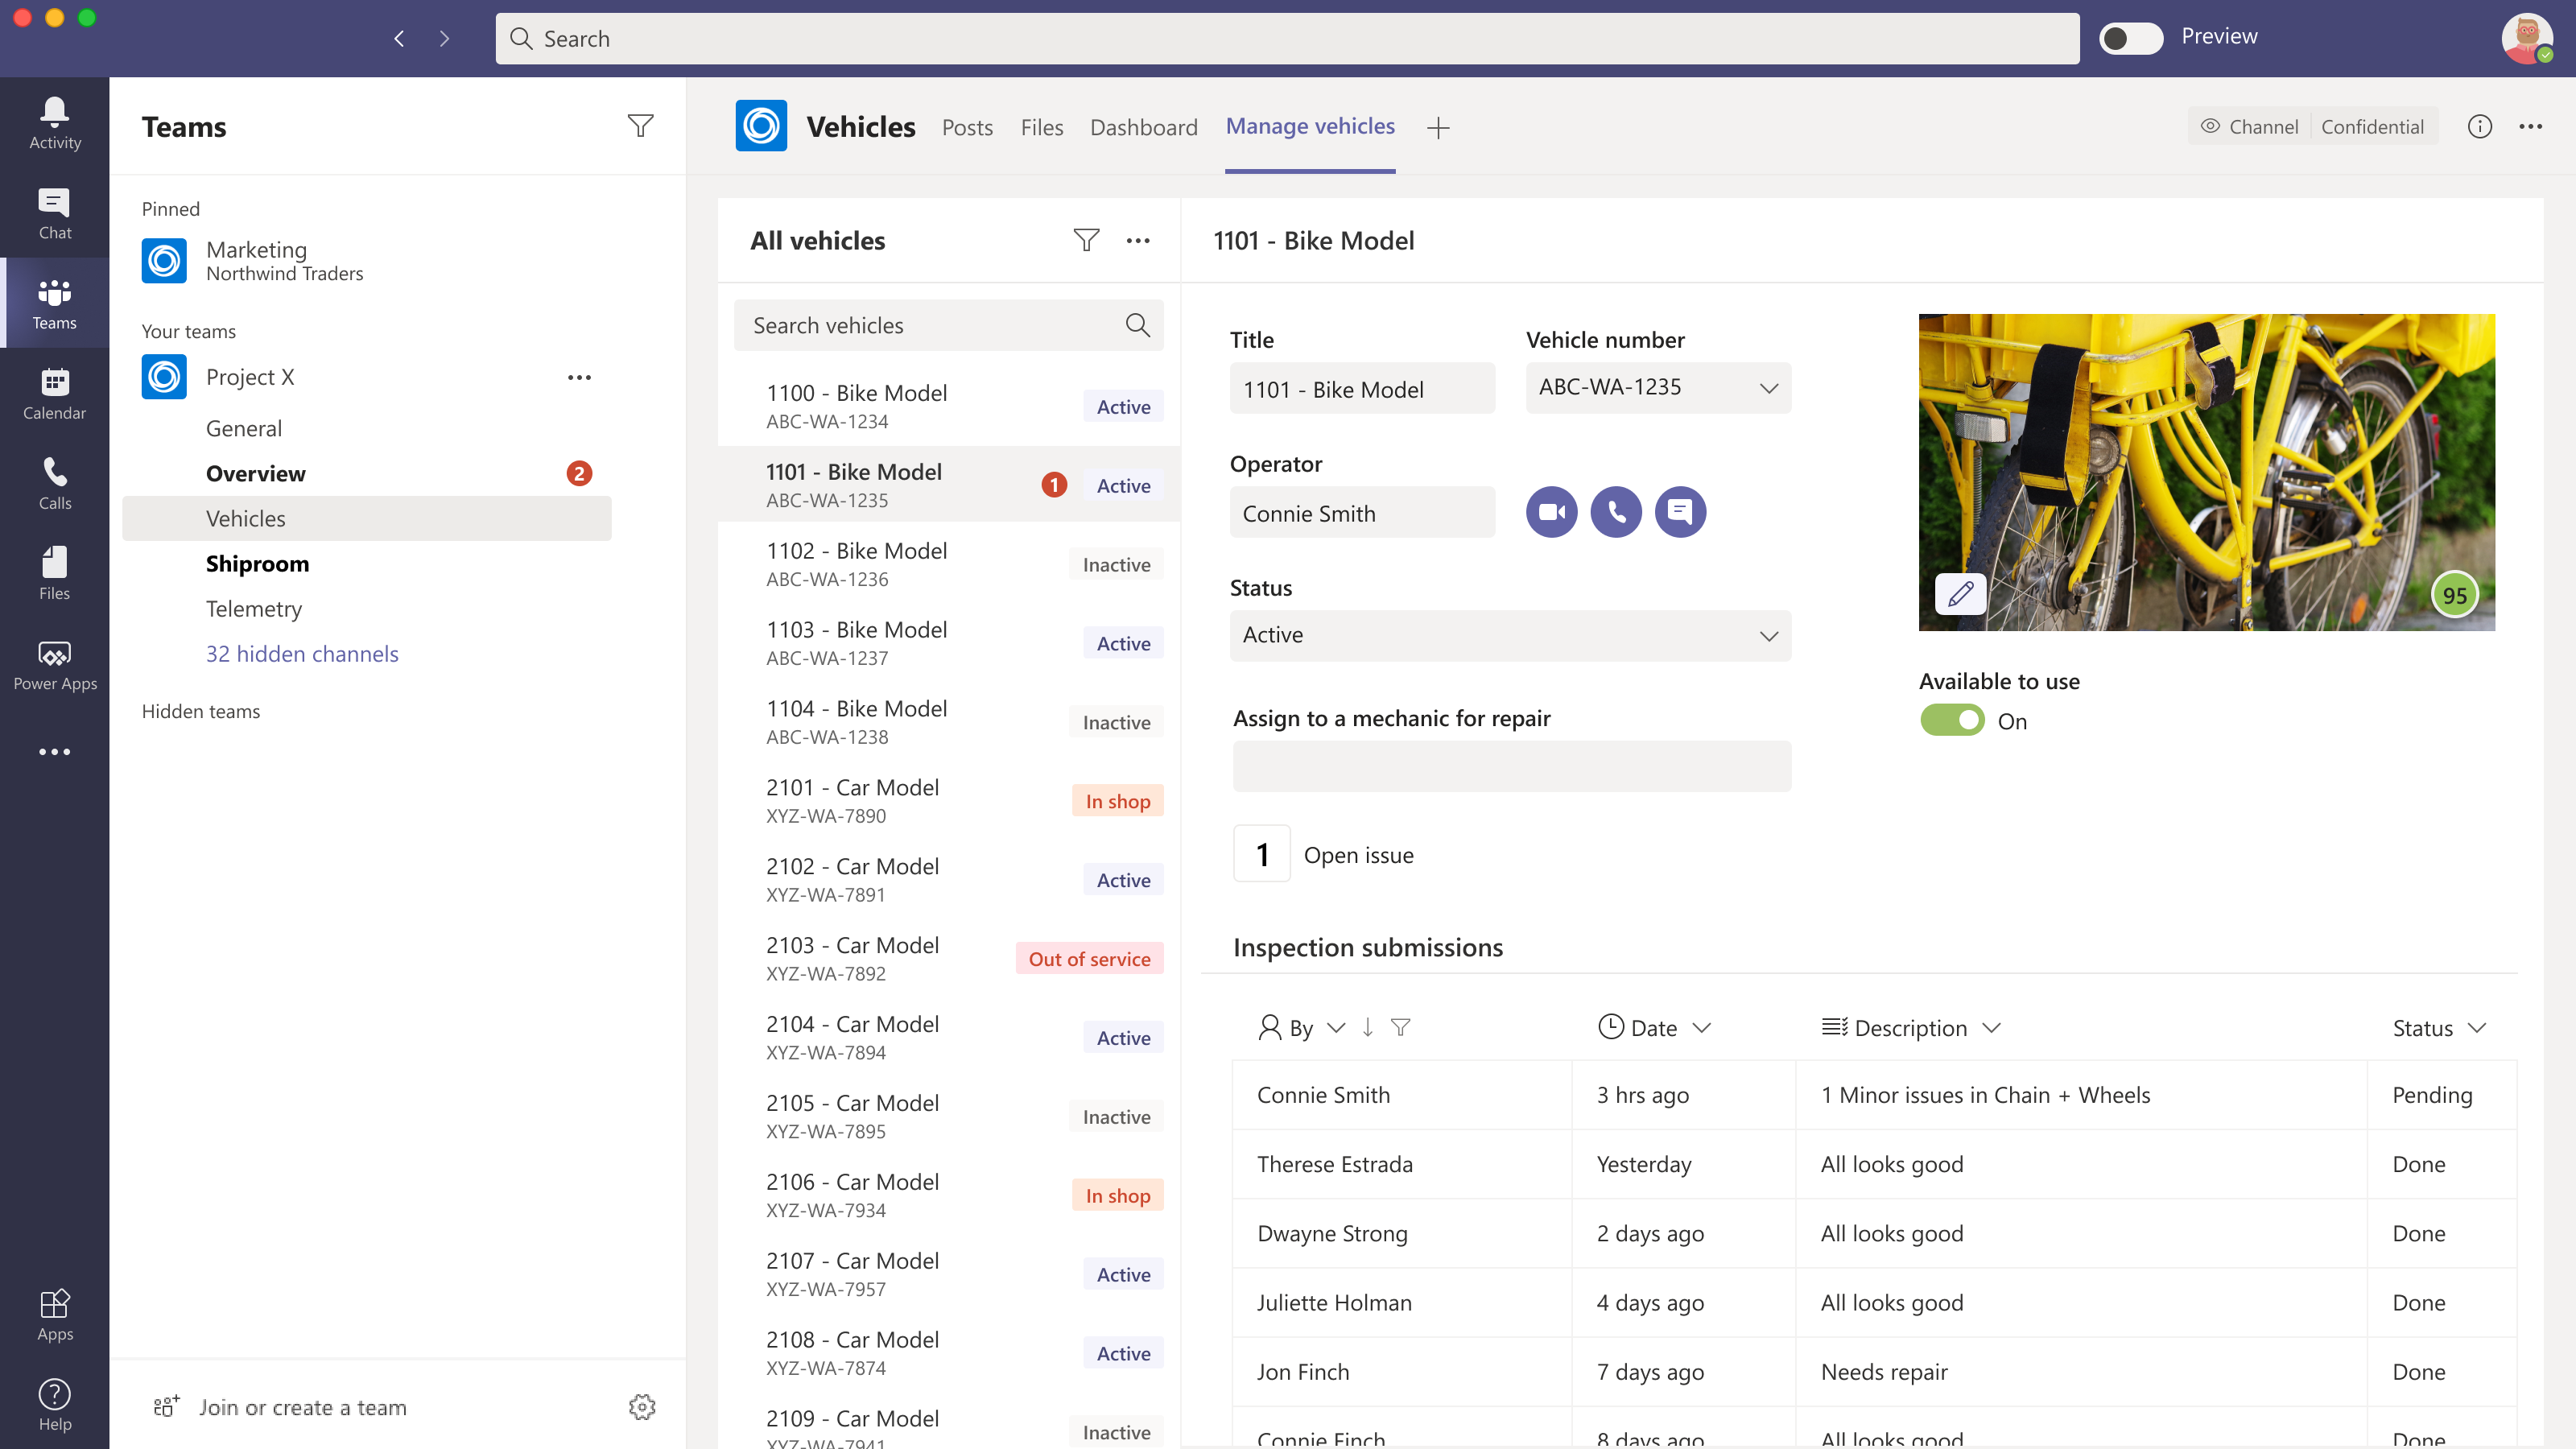 Manage vehicles within Microsoft Teams